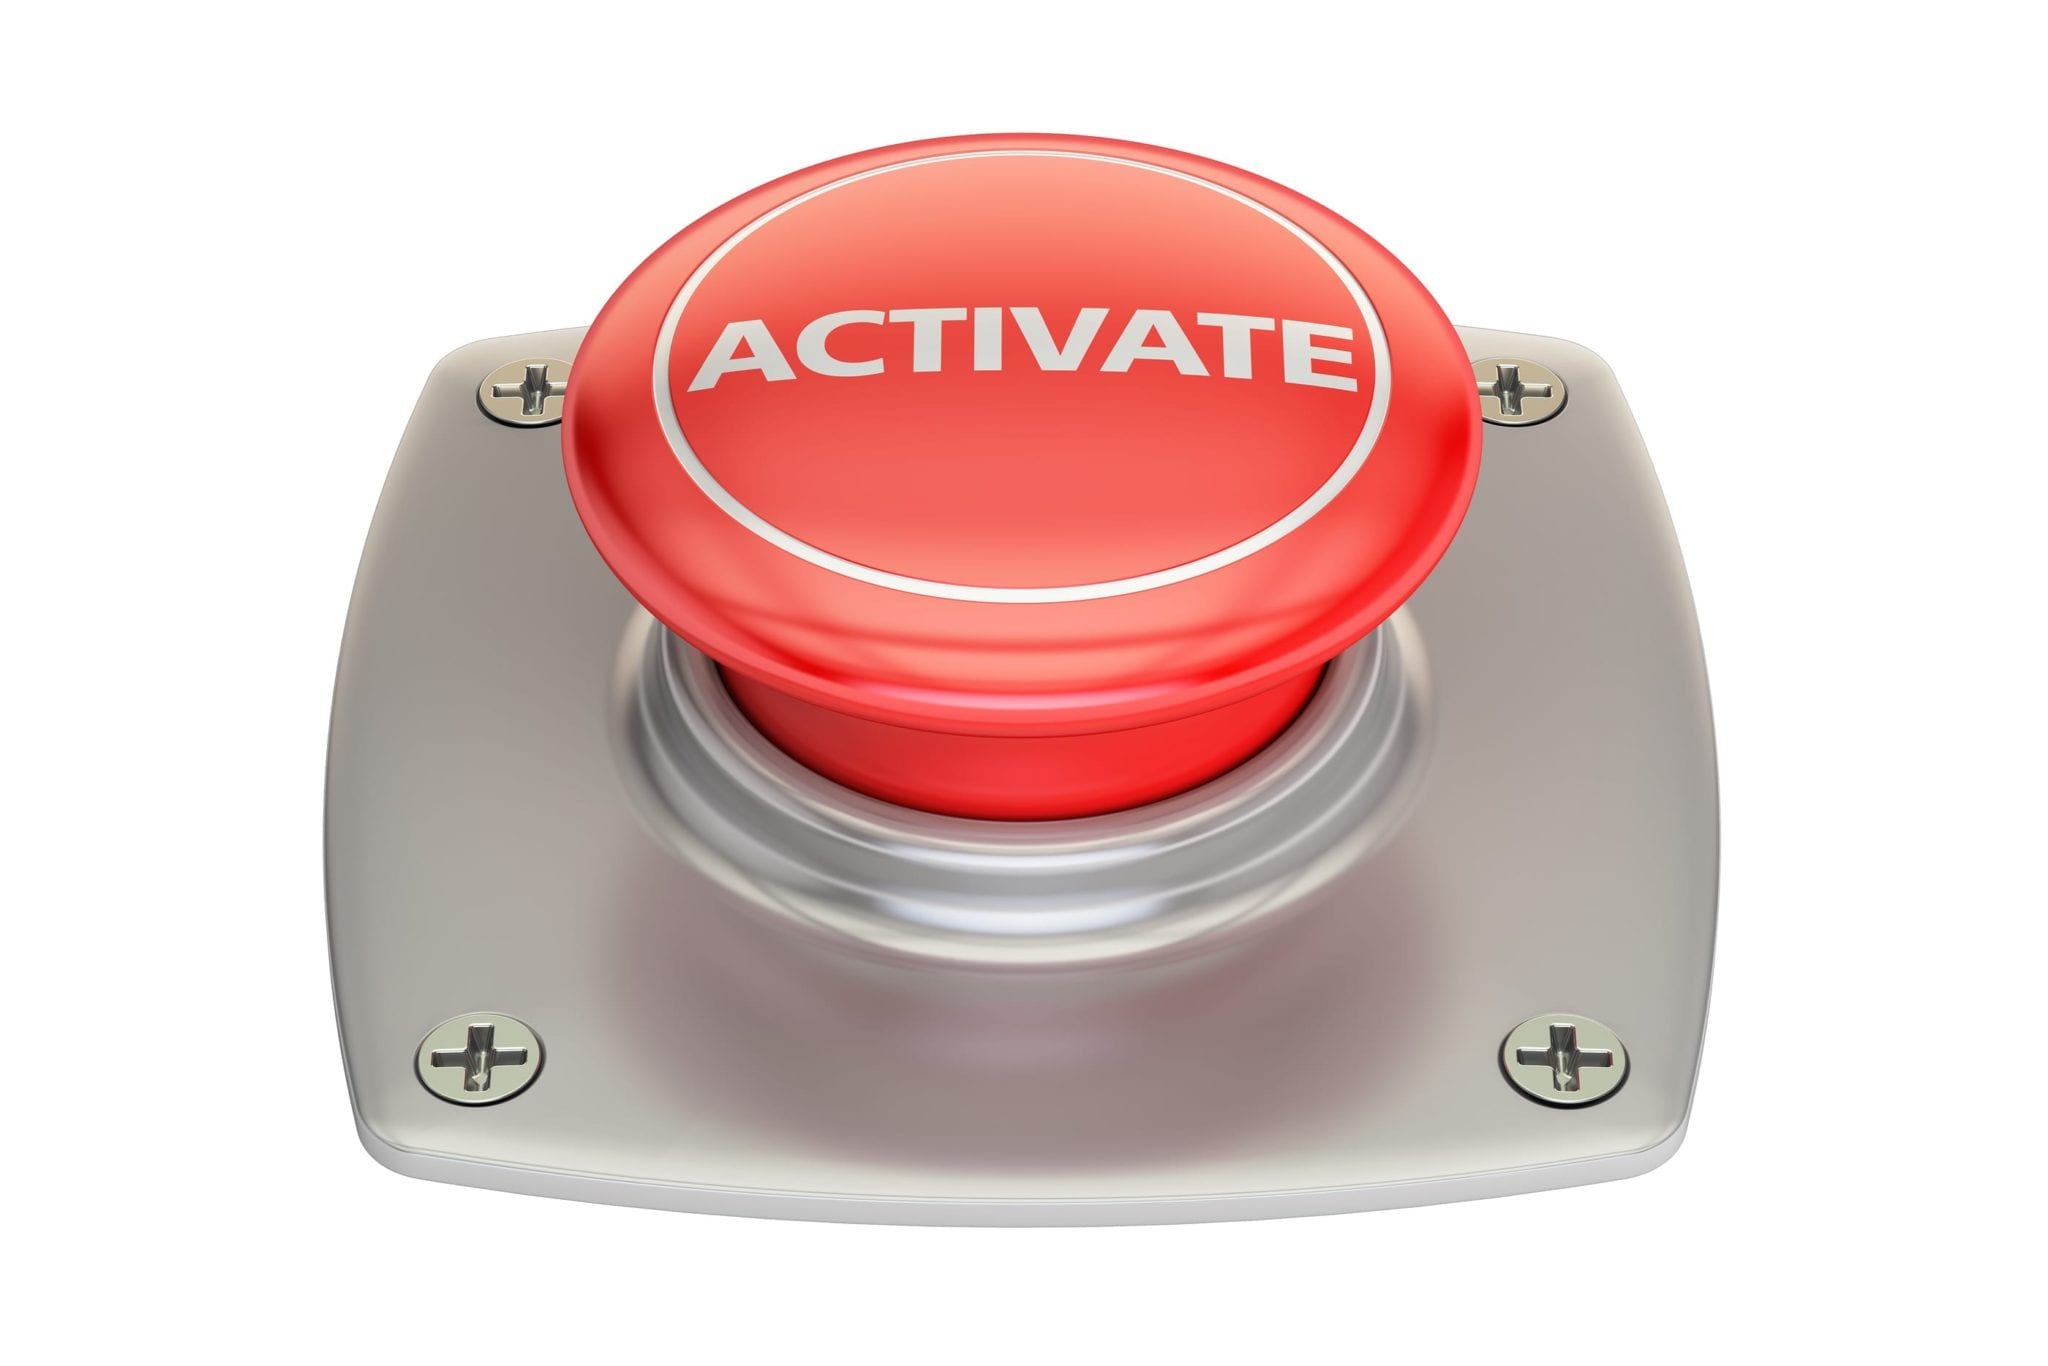 a large red button marked "Activate"